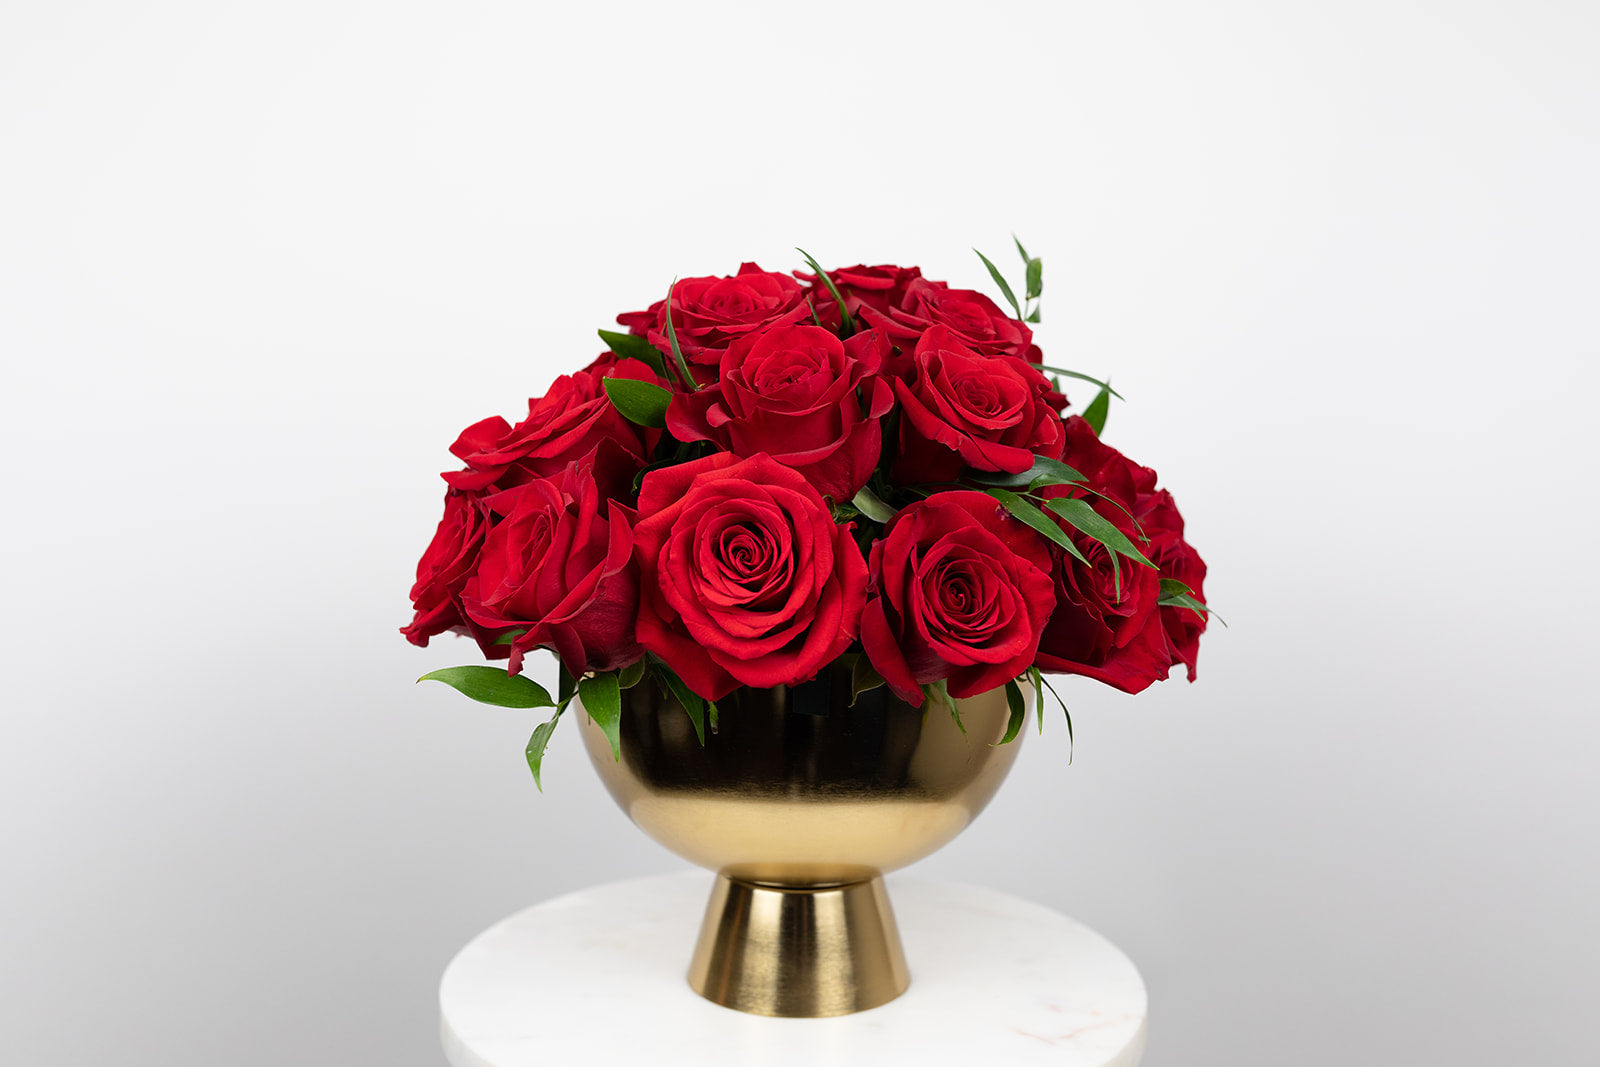 Red rose arrangement in gold compote. Red roses for Valentinne's Day. Delivery in local Kansas City Great Metropolitan Area. Same day delivery Valentine's Day arrangements. Glam arrangement.